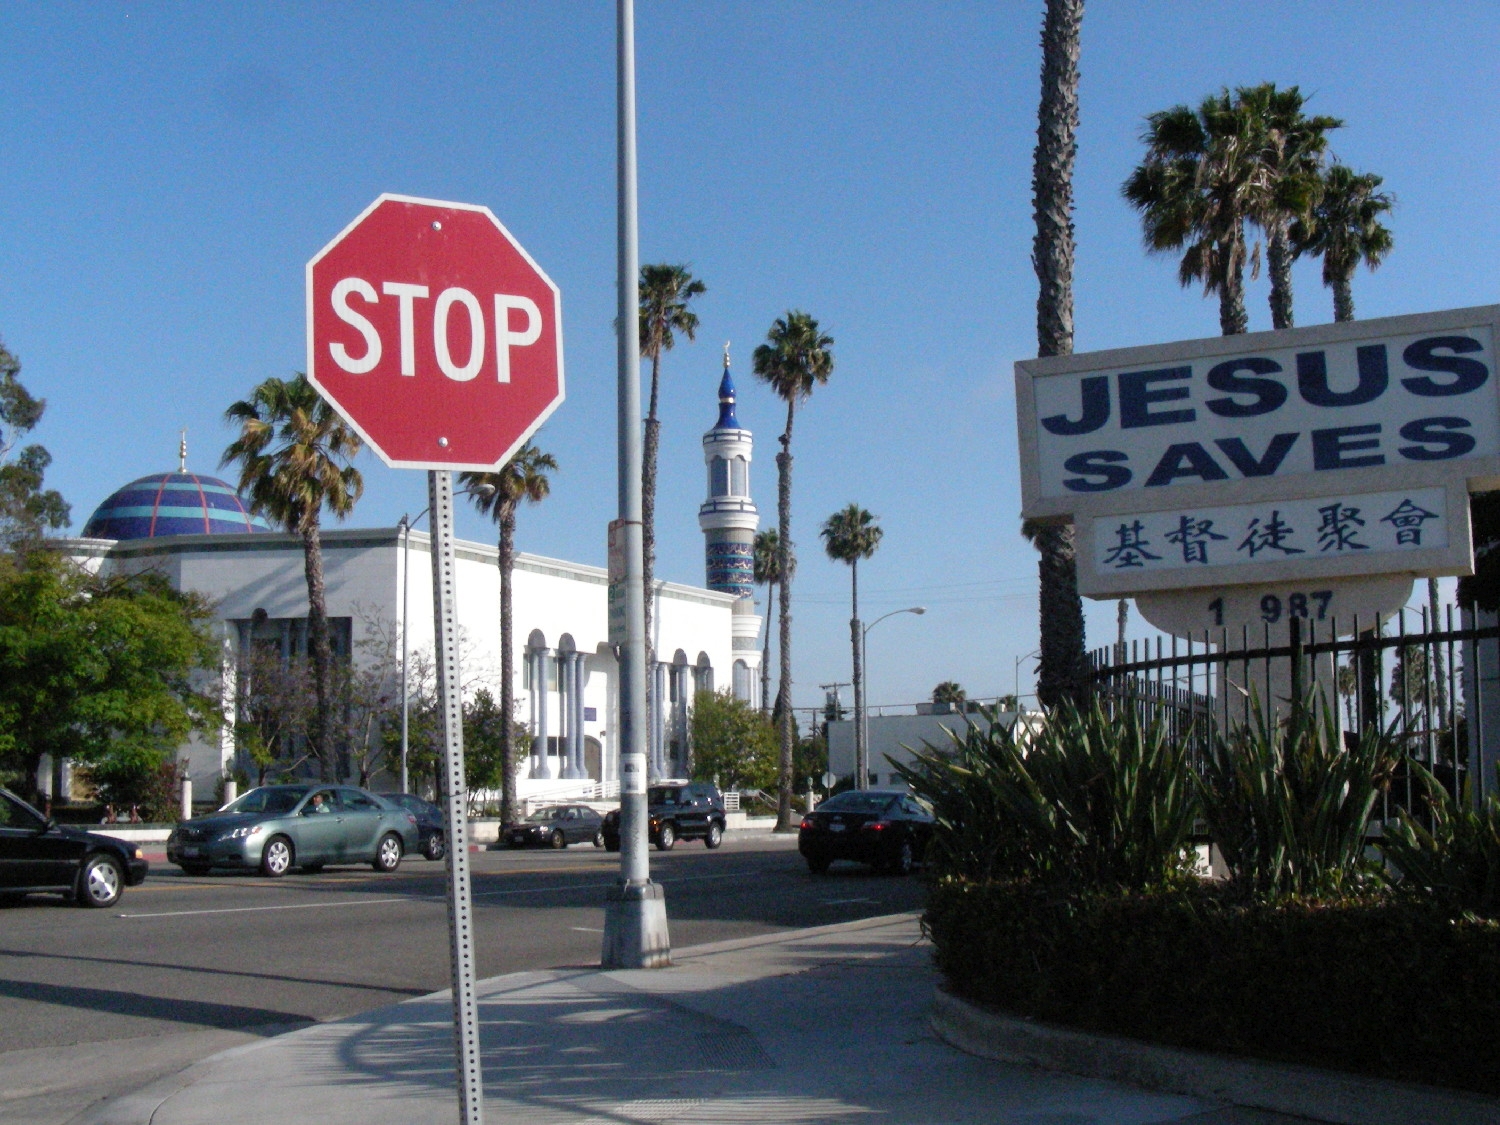 Mosque set in surrounding neighborhood, showing sign for church across the street "Jesus Saves"